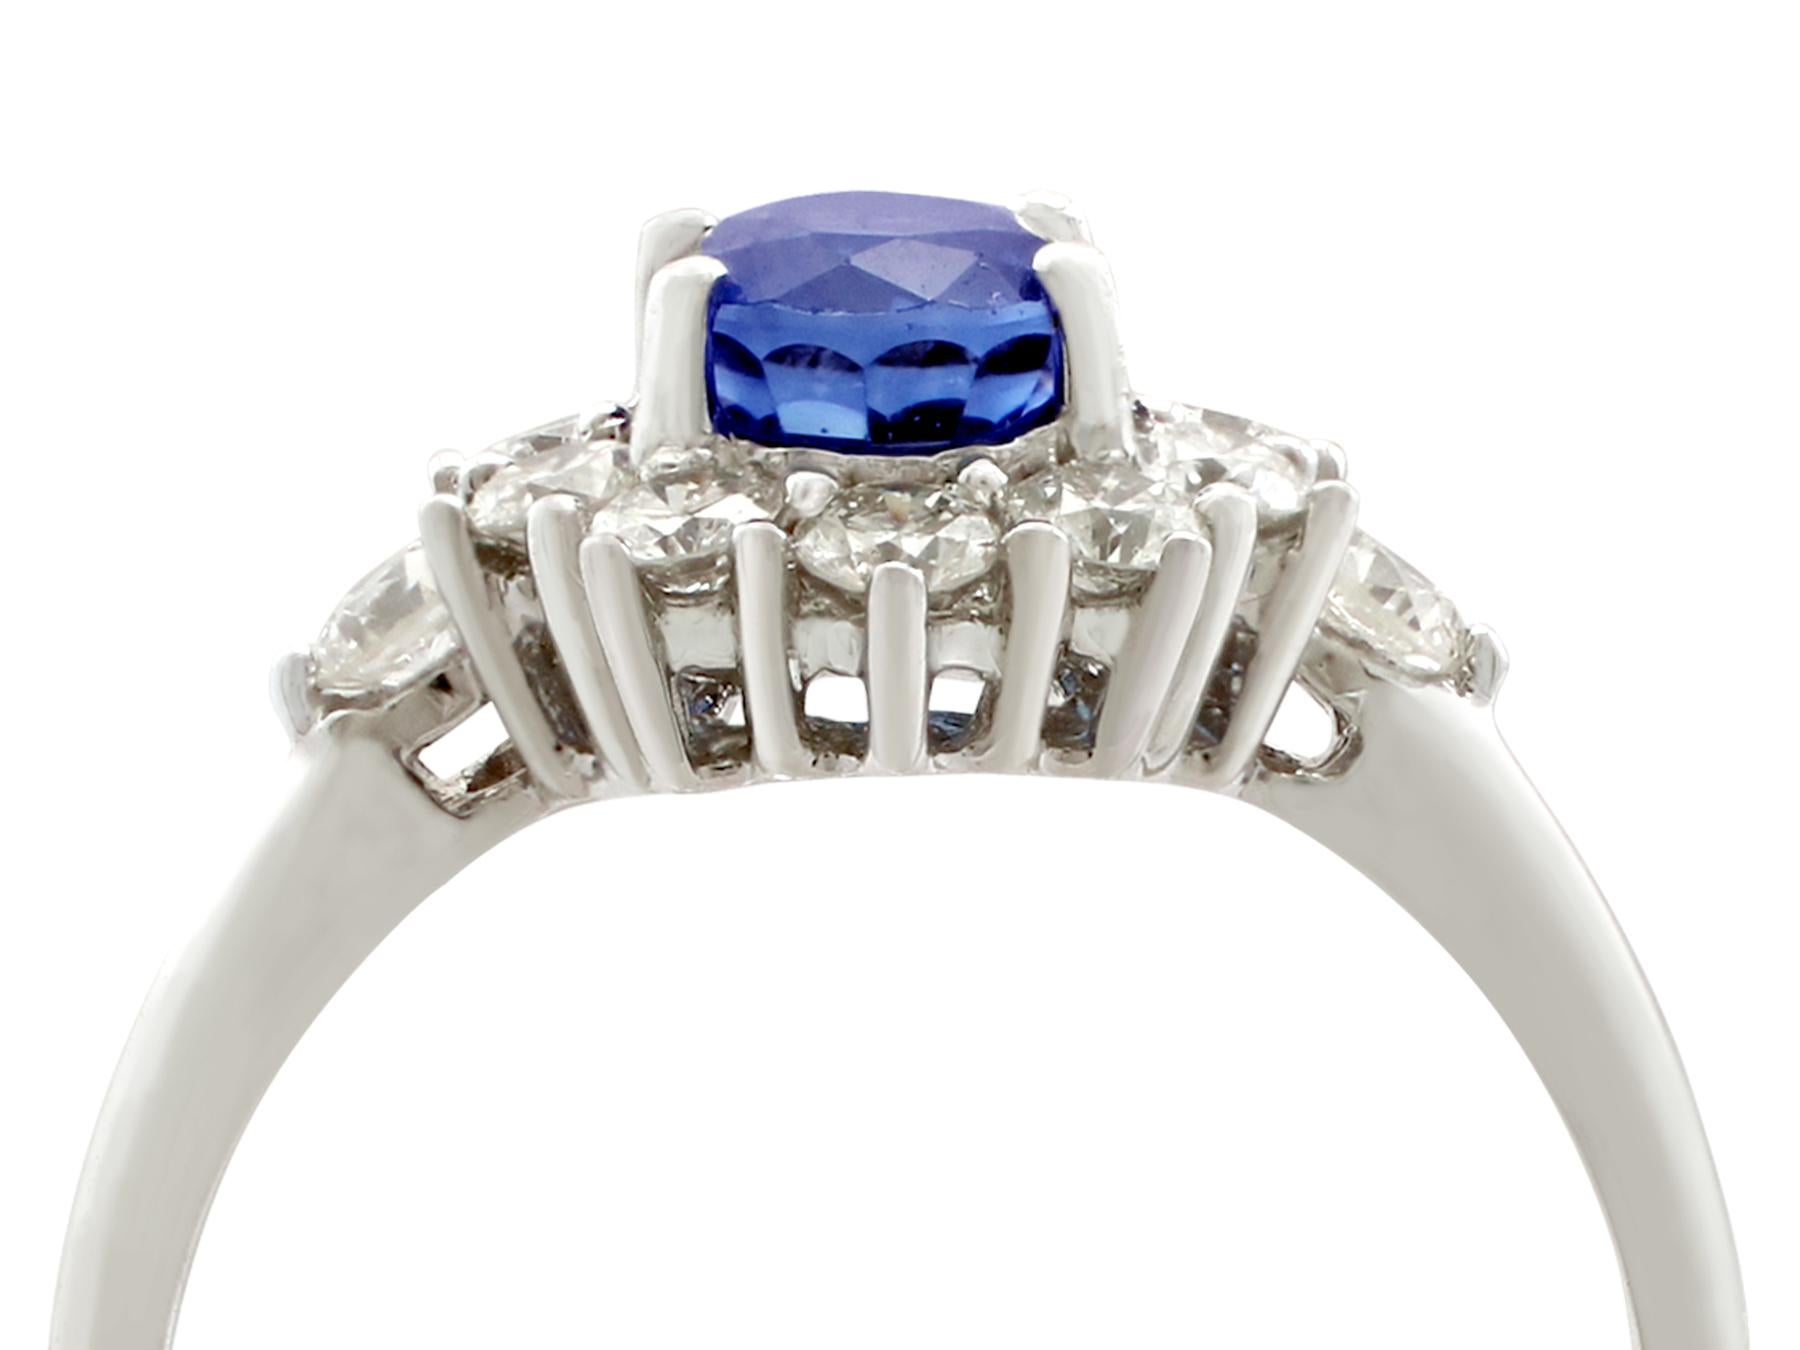 A stunning, fine and impressive vintage 1.21 carat natural blue sapphire and 0.84 carat diamond, 18 karat white gold cluster ring; part of our vintage jewelry and estate jewelry collections

This stunning sapphire cluster ring has been crafted in